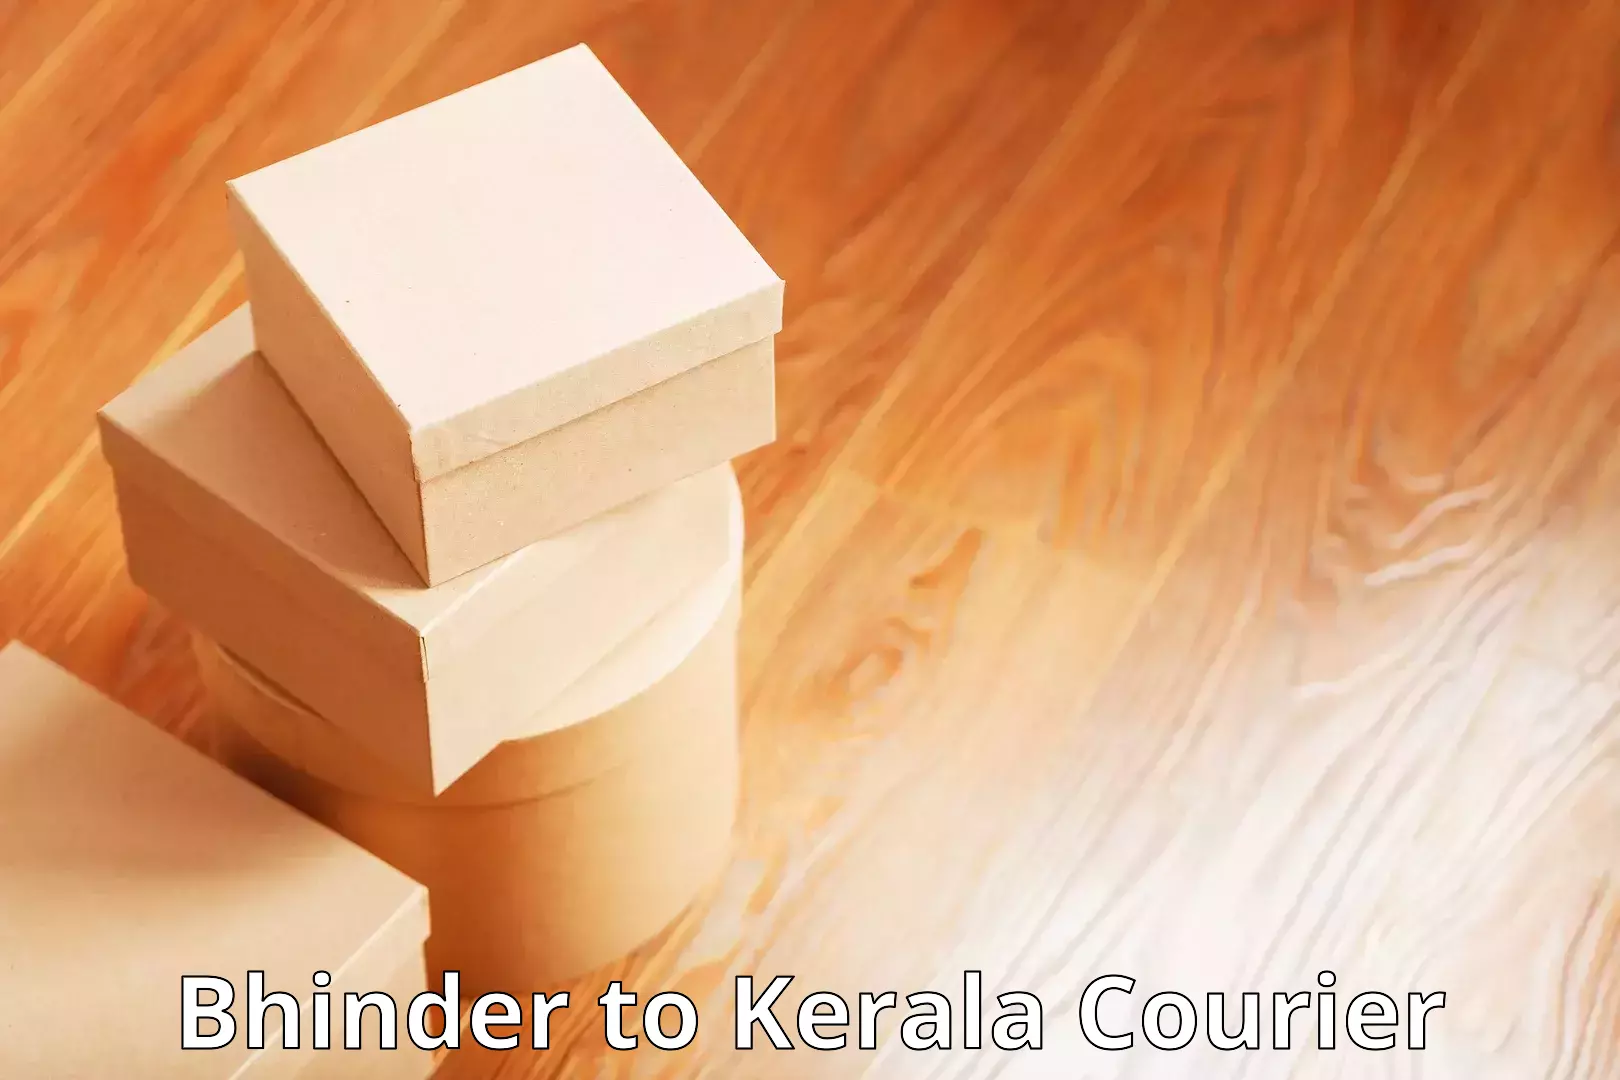 Supply chain delivery Bhinder to Kerala